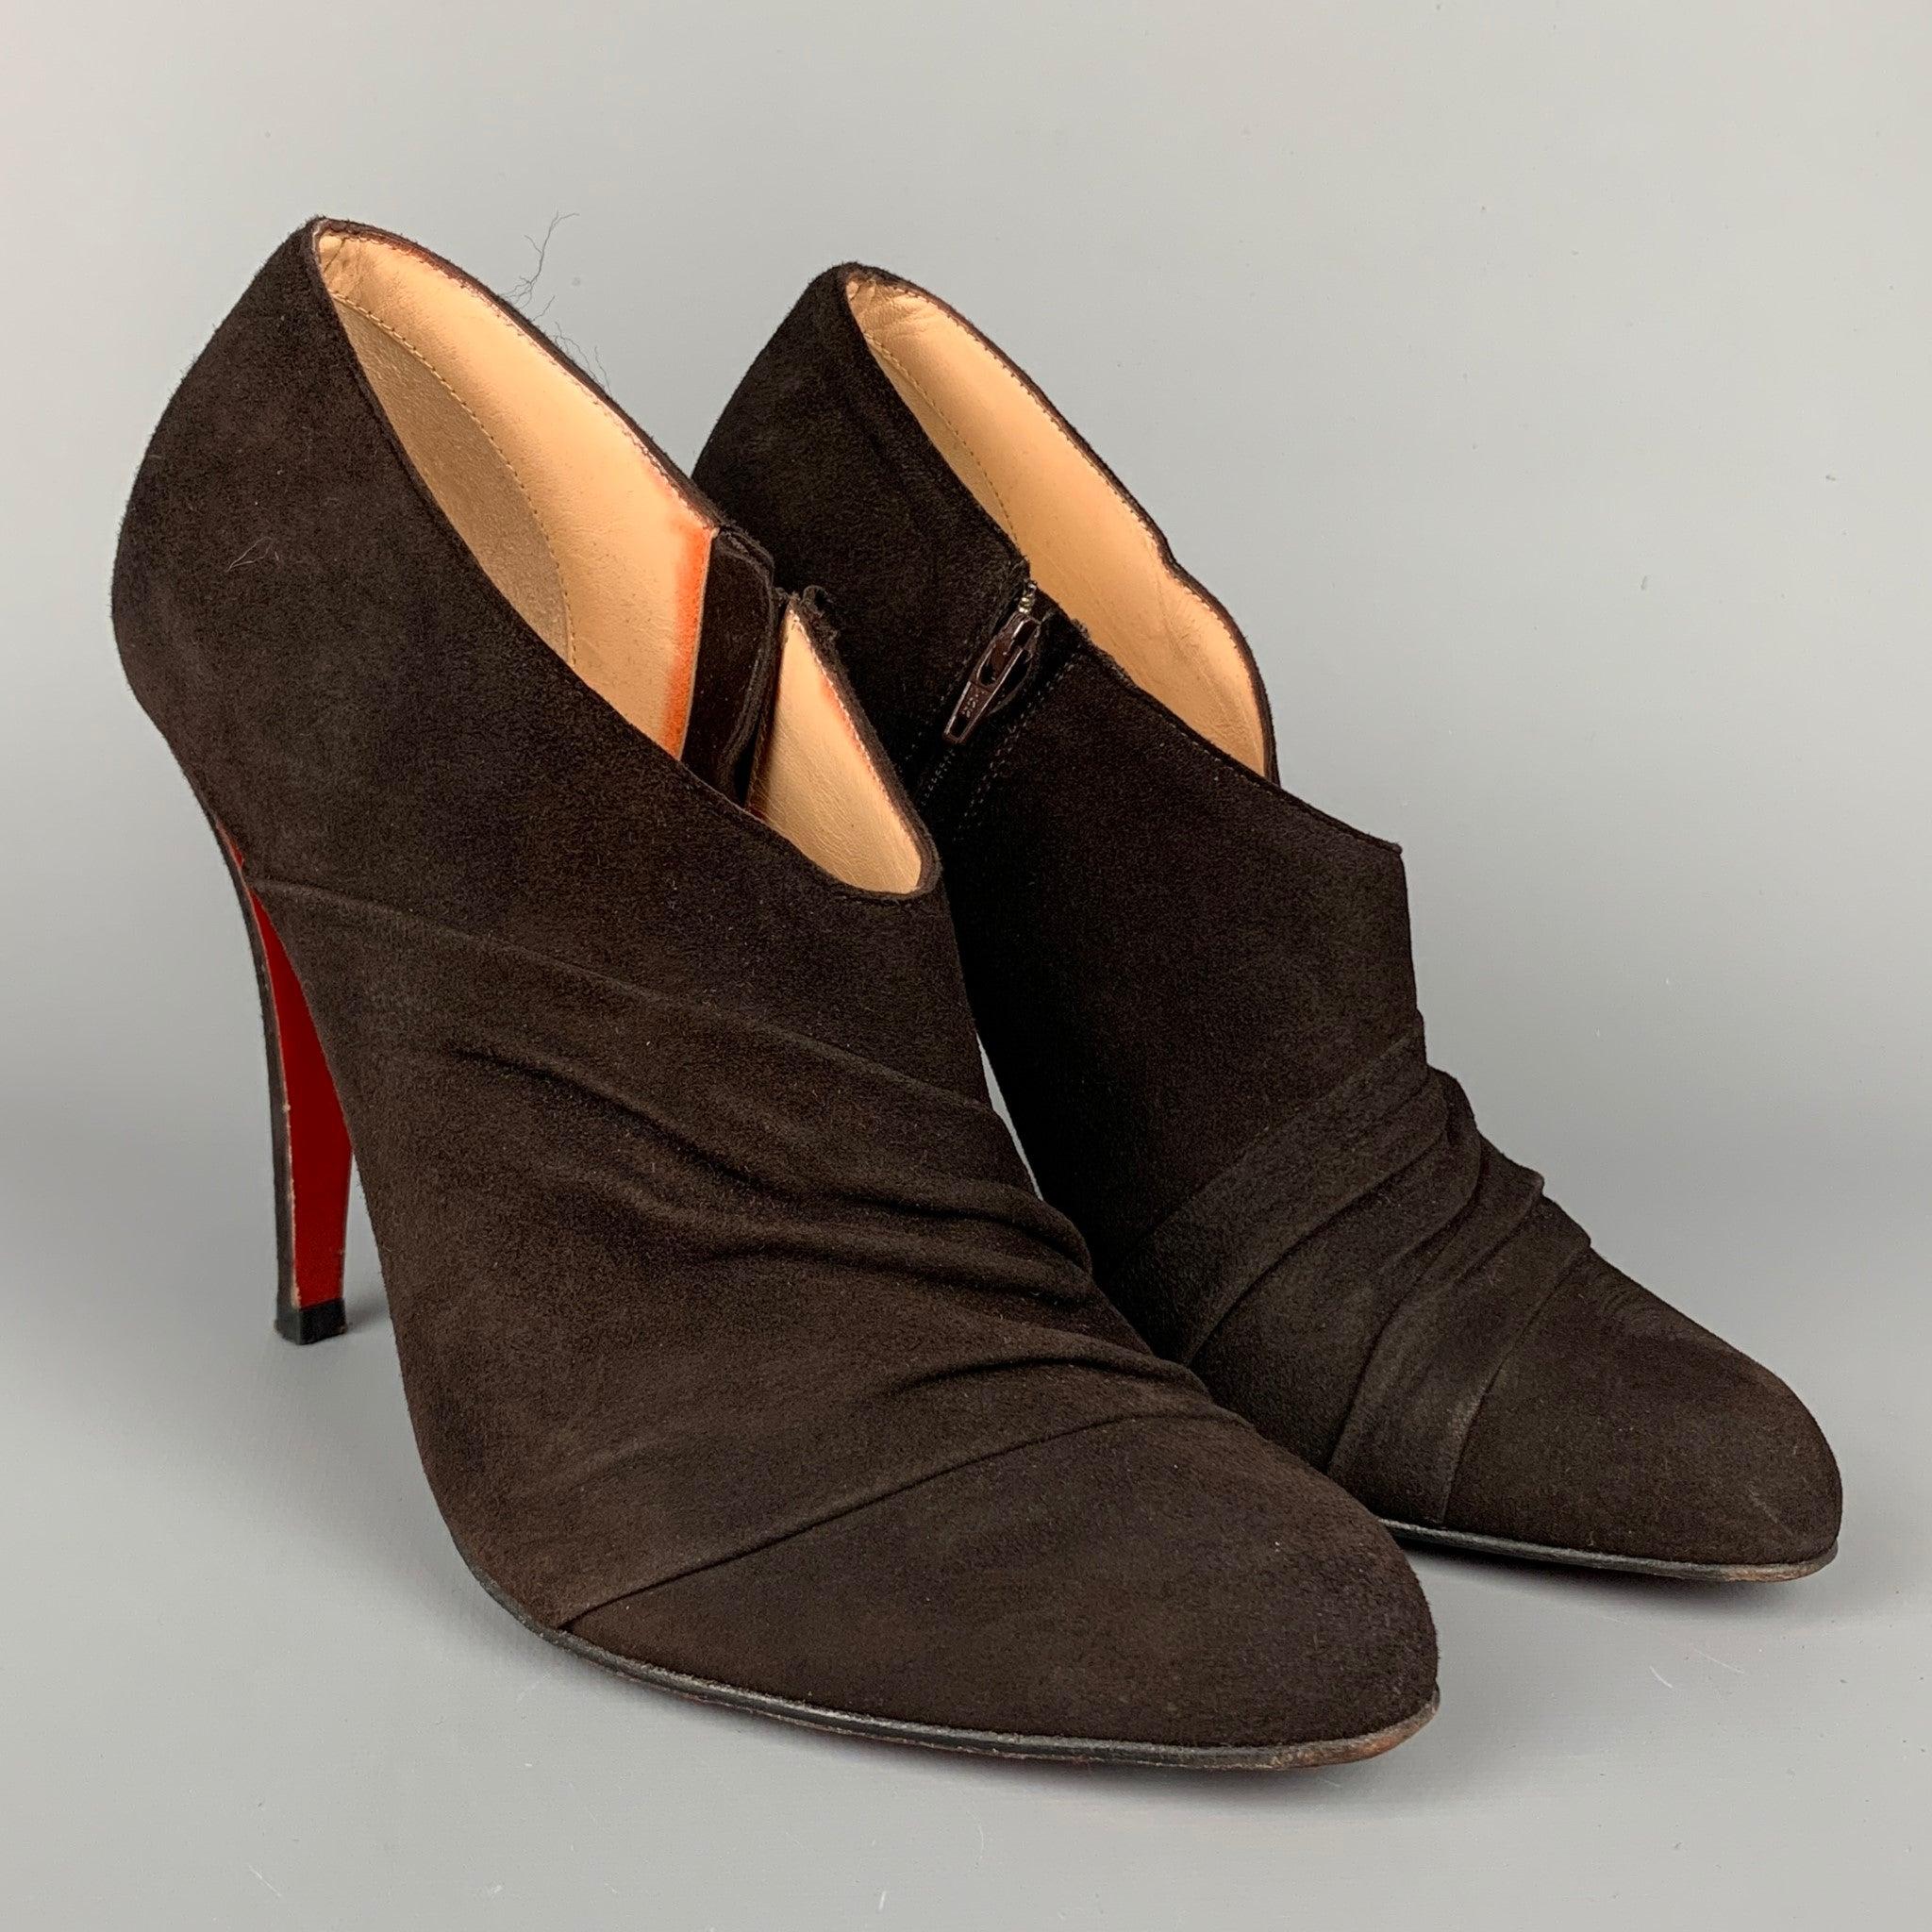 CHRISTIAN LOUBOUTIN boots comes in a dark brown suede featuring ruched design, stacked heel, side zipper closure, and signature red bottom sole. Comes with dust bag. Made in Italy.Very Good
Pre-Owned Condition. Minor wear at sole.  

Marked:   EU 37